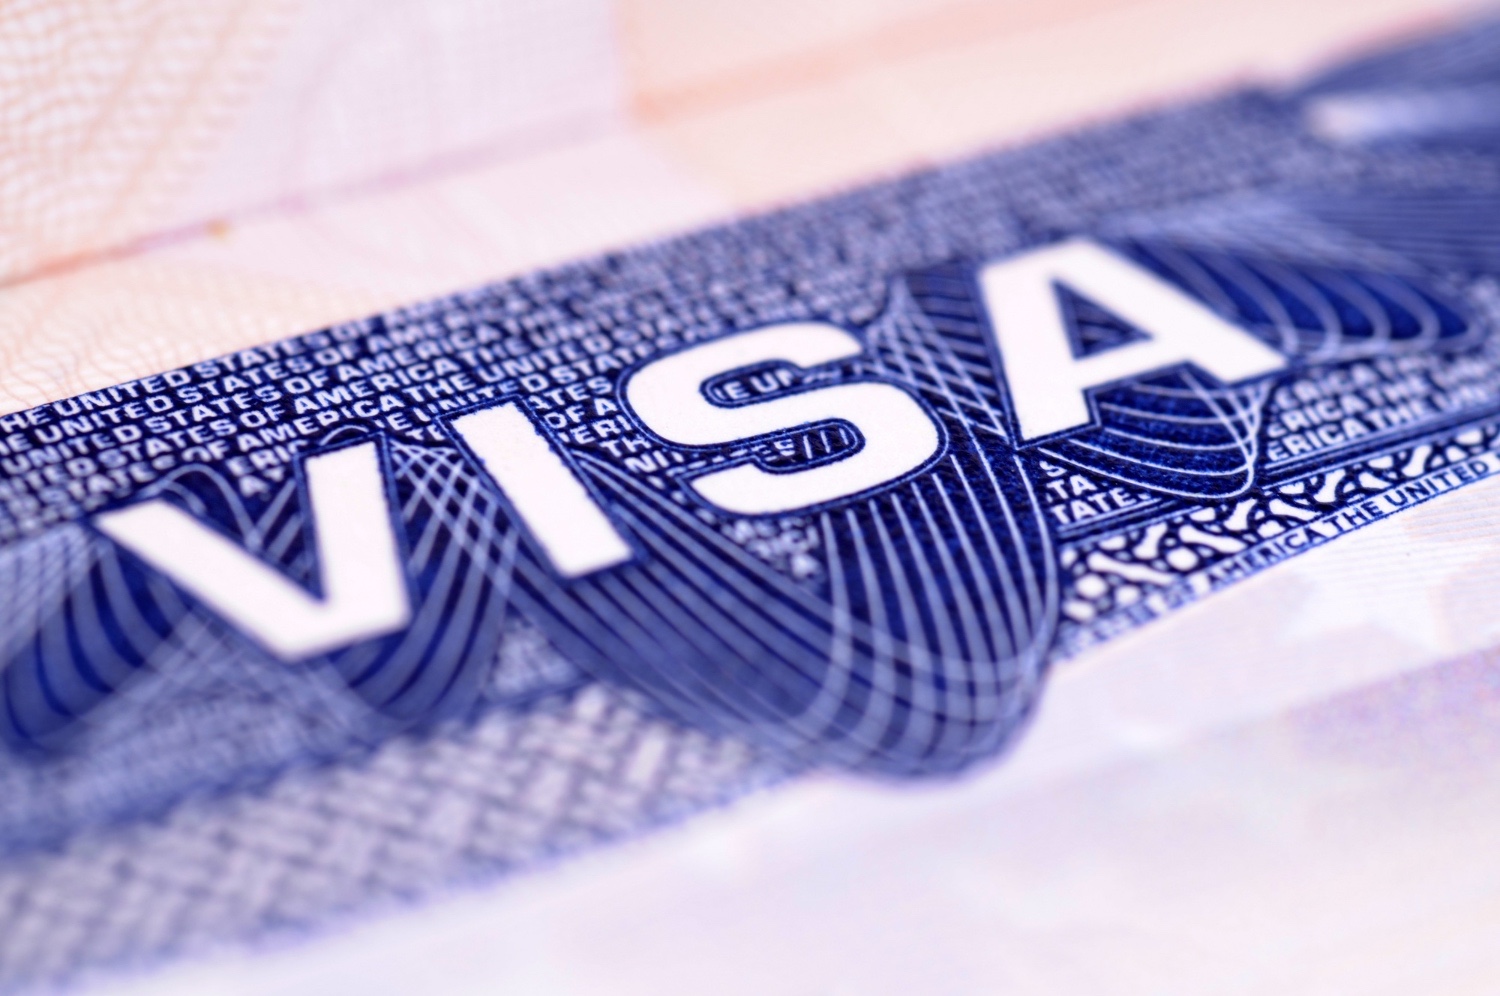 Foreign nationals can temporarily work in the United States with nonimmigrant visas